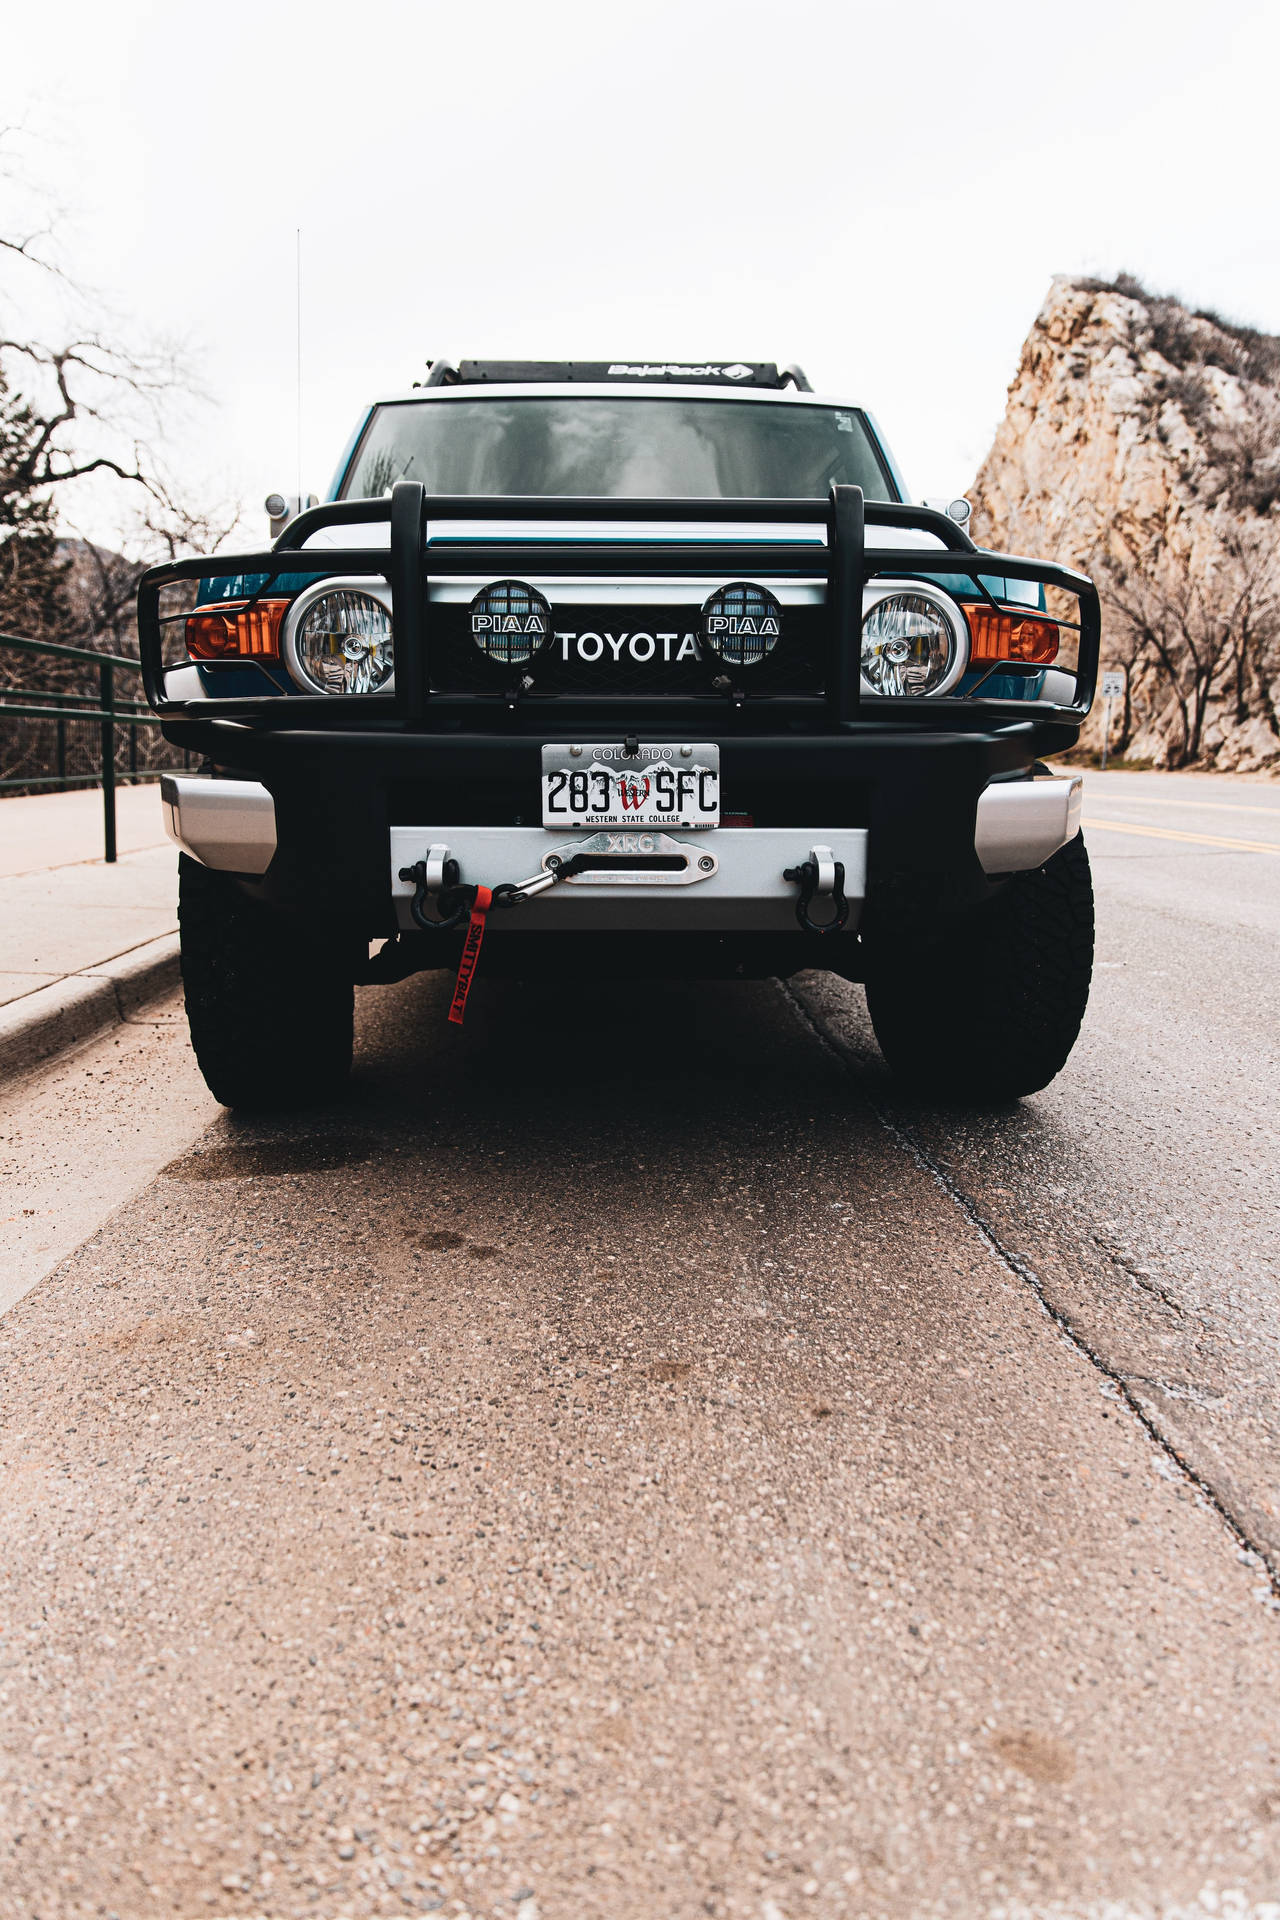 Toyota Suv With Bumper Guard Background